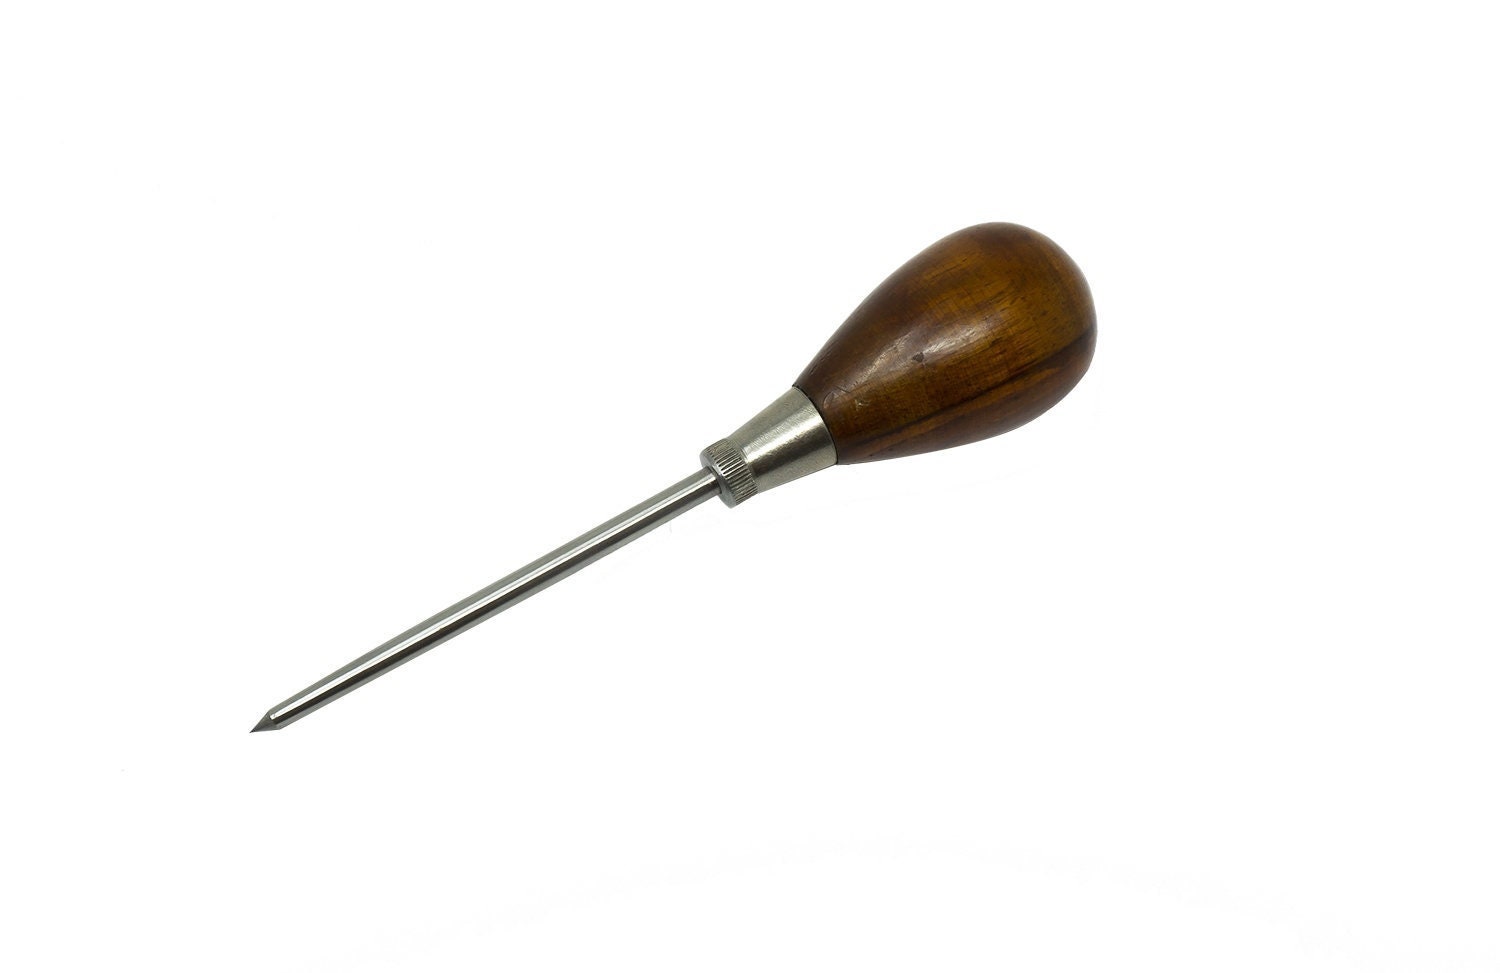 Vintage Maid O Metal Leather Awl Punch Tool with Wood Handle